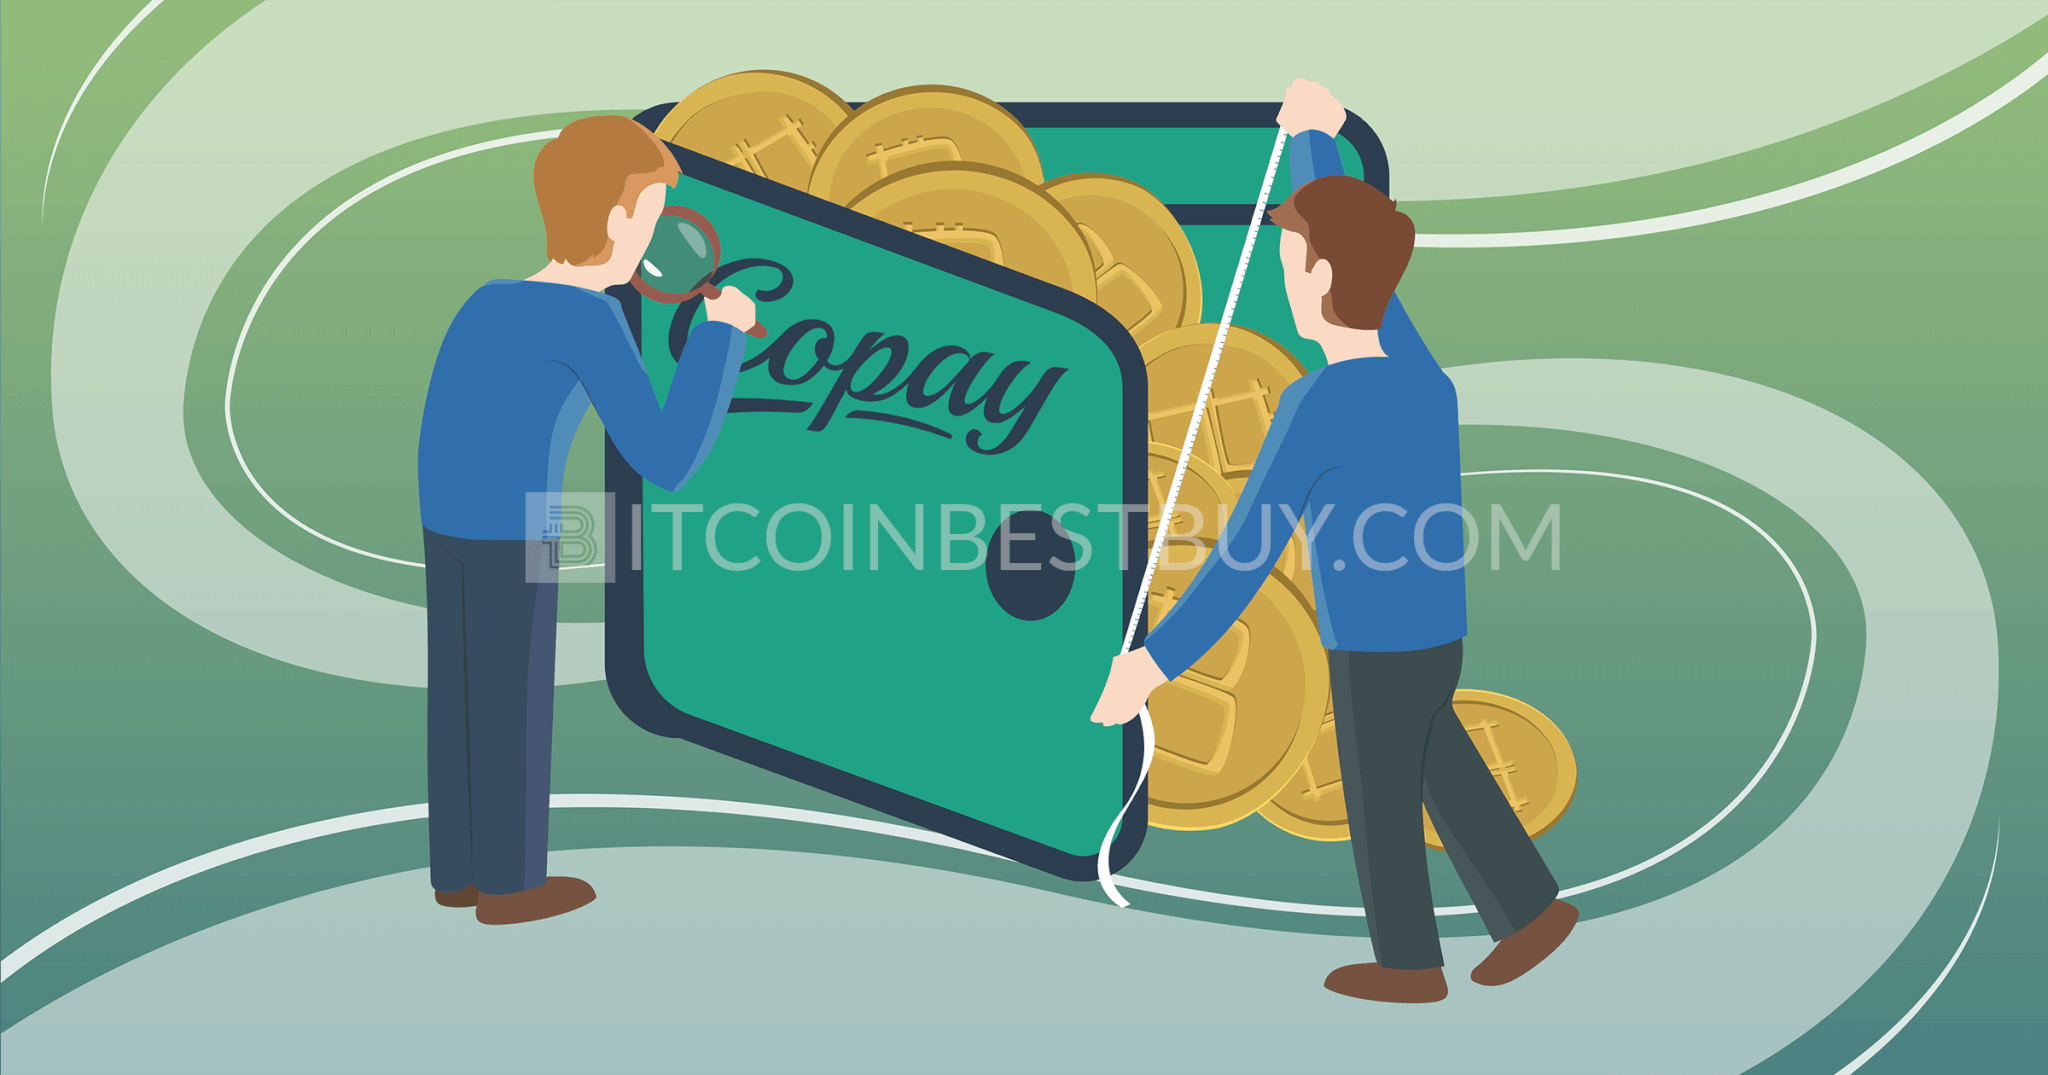 can i use copay to store other cryptocurrencies